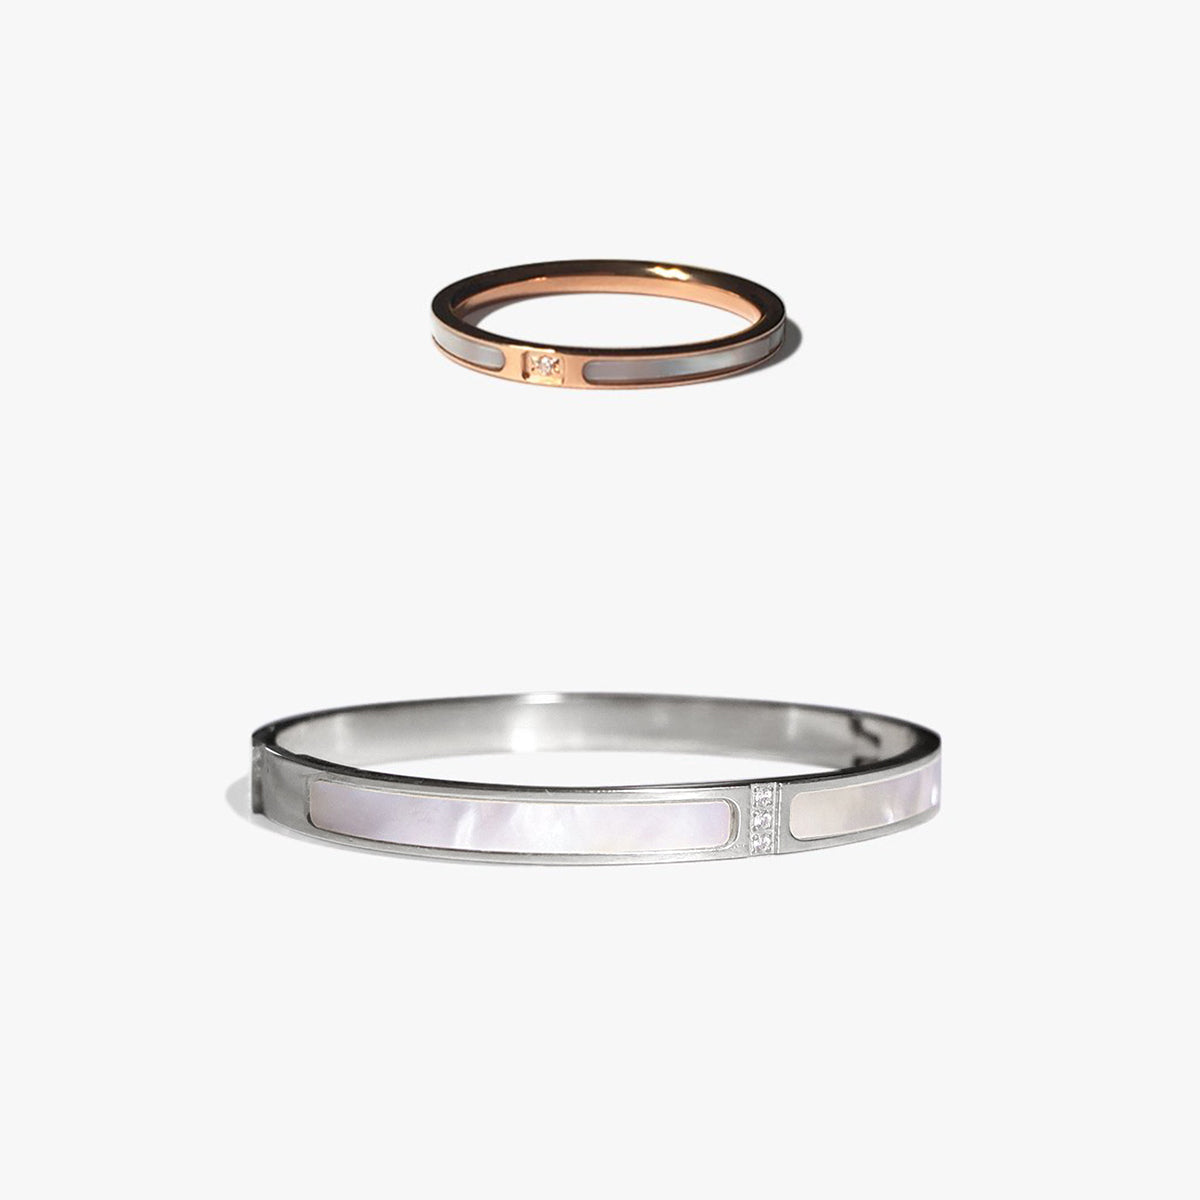 The Pearl Ring and Bangle Bundle